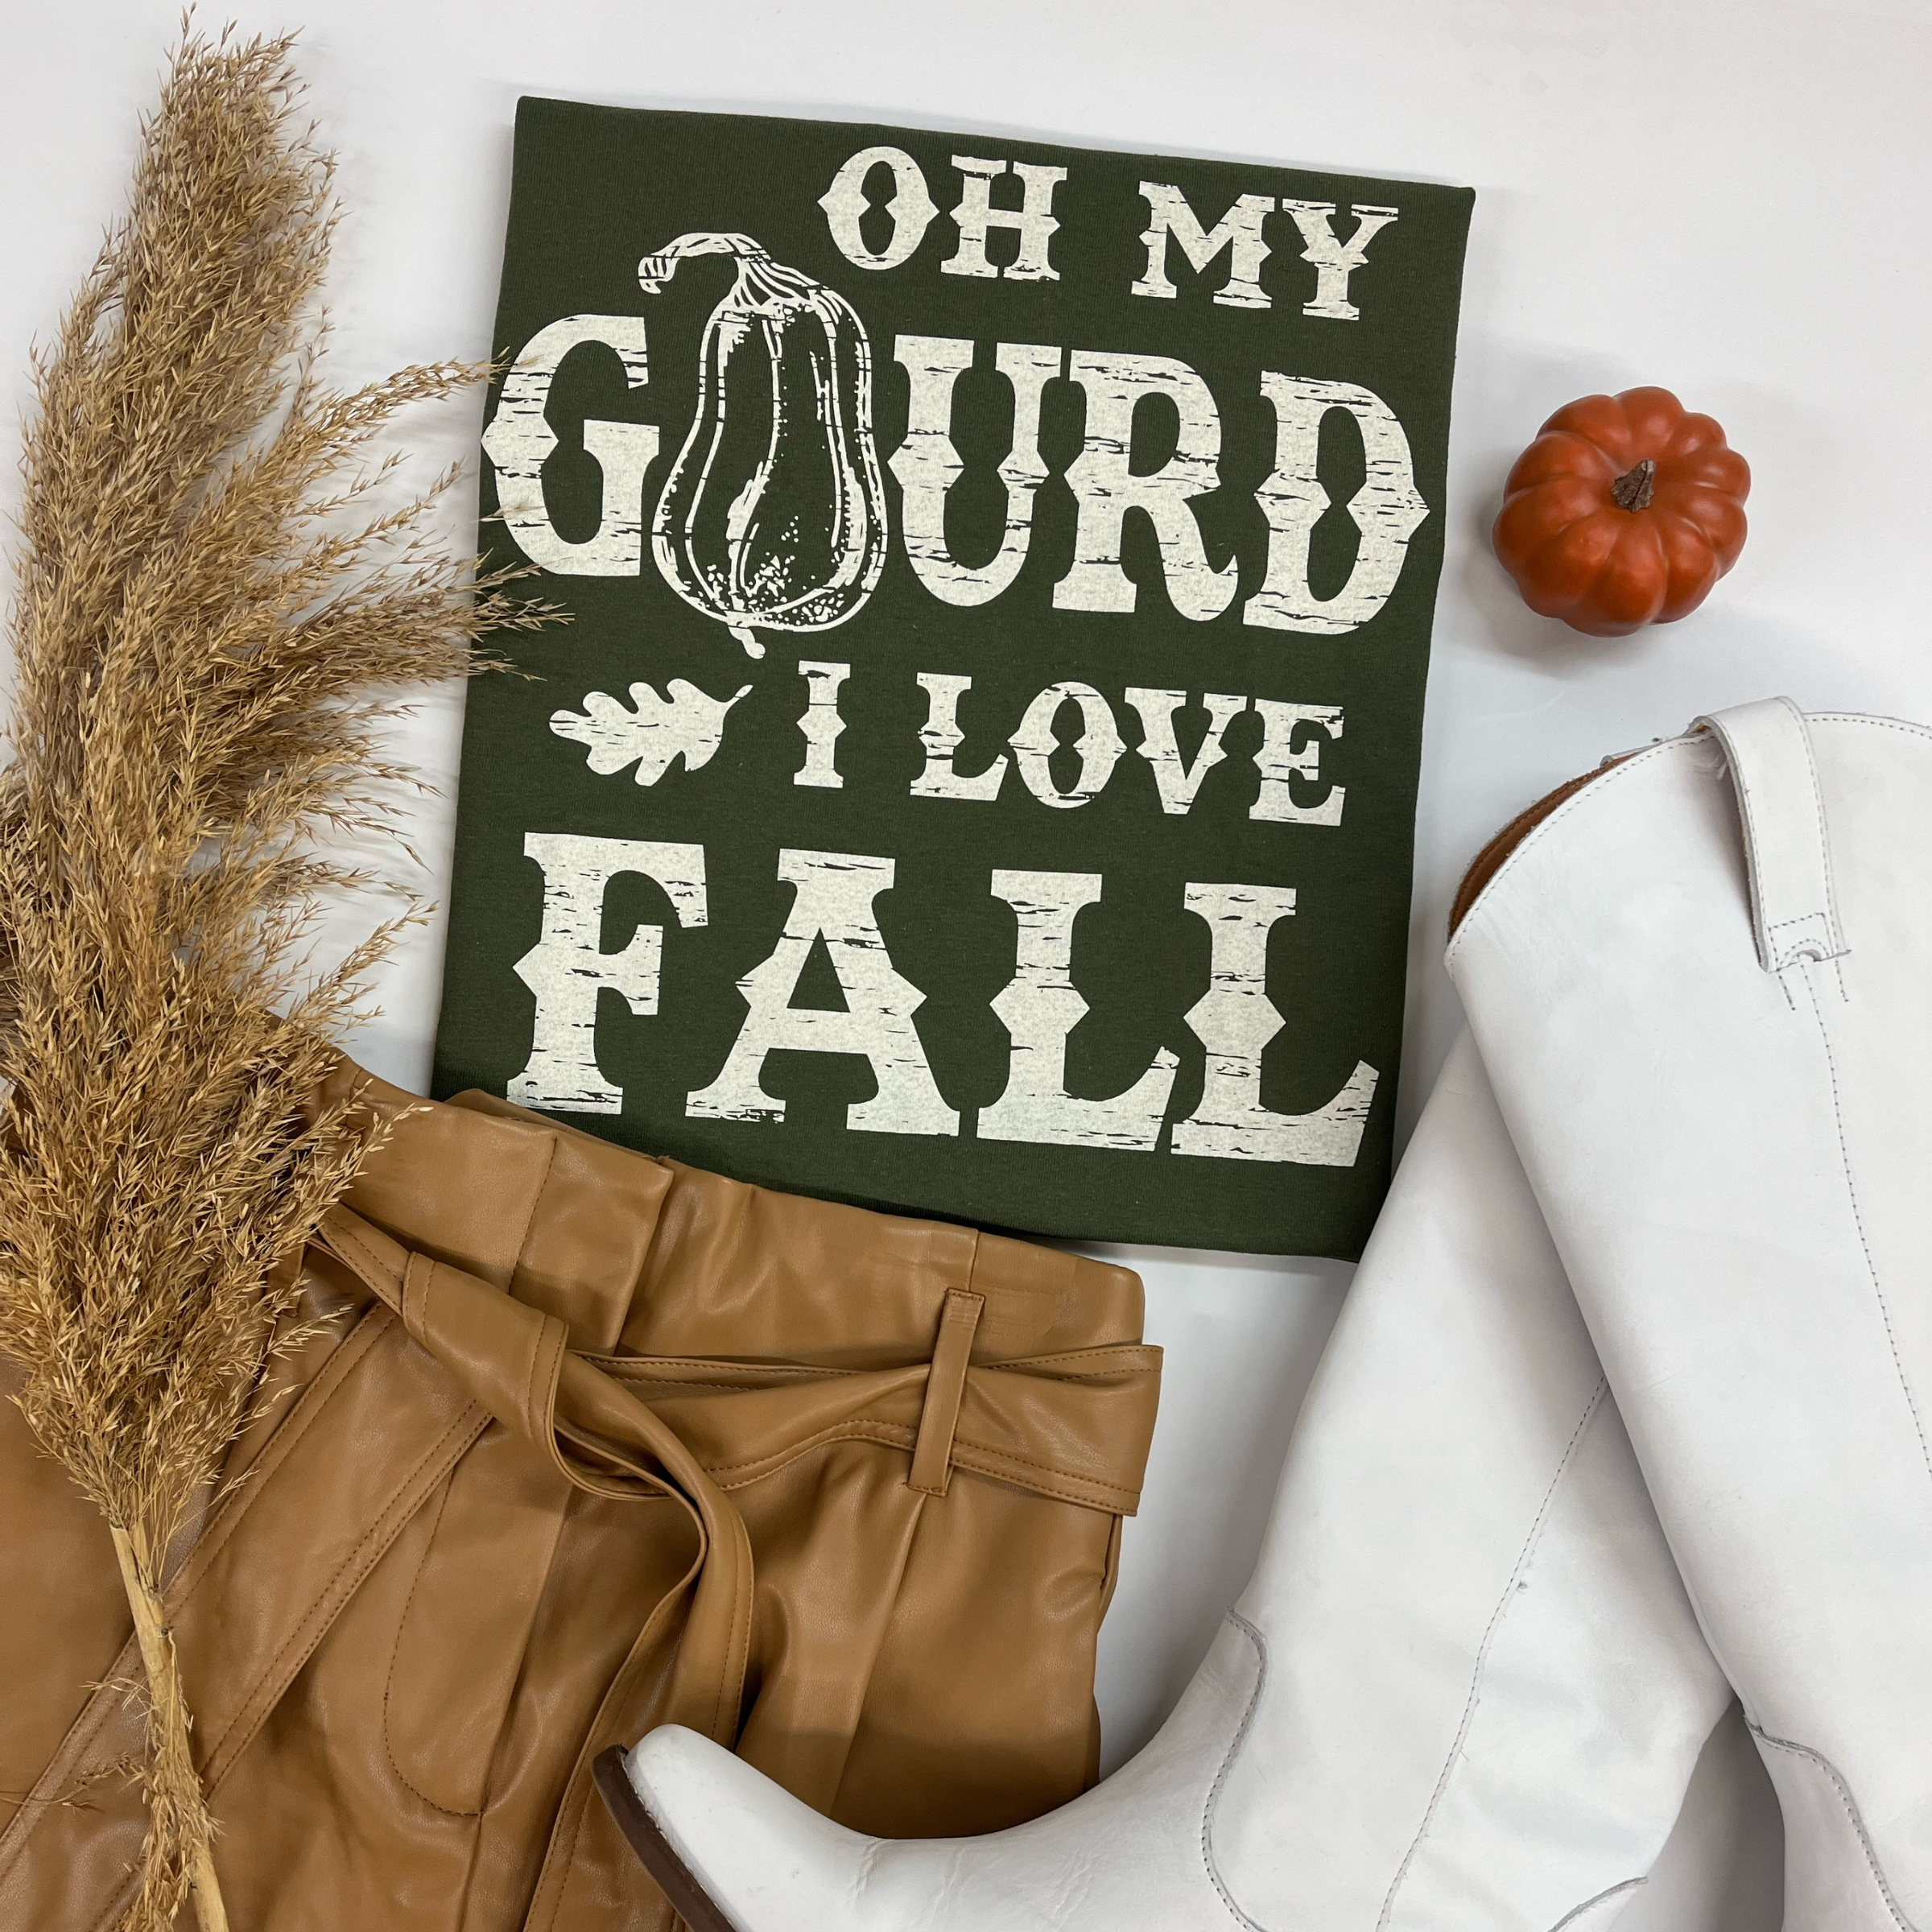 A folded tee shirt that is moss green. The t-shirt has white lettering that says  "Oh my Gourd I love fall".  Pictured on a white background with tan faux leather shorts and white boots. 